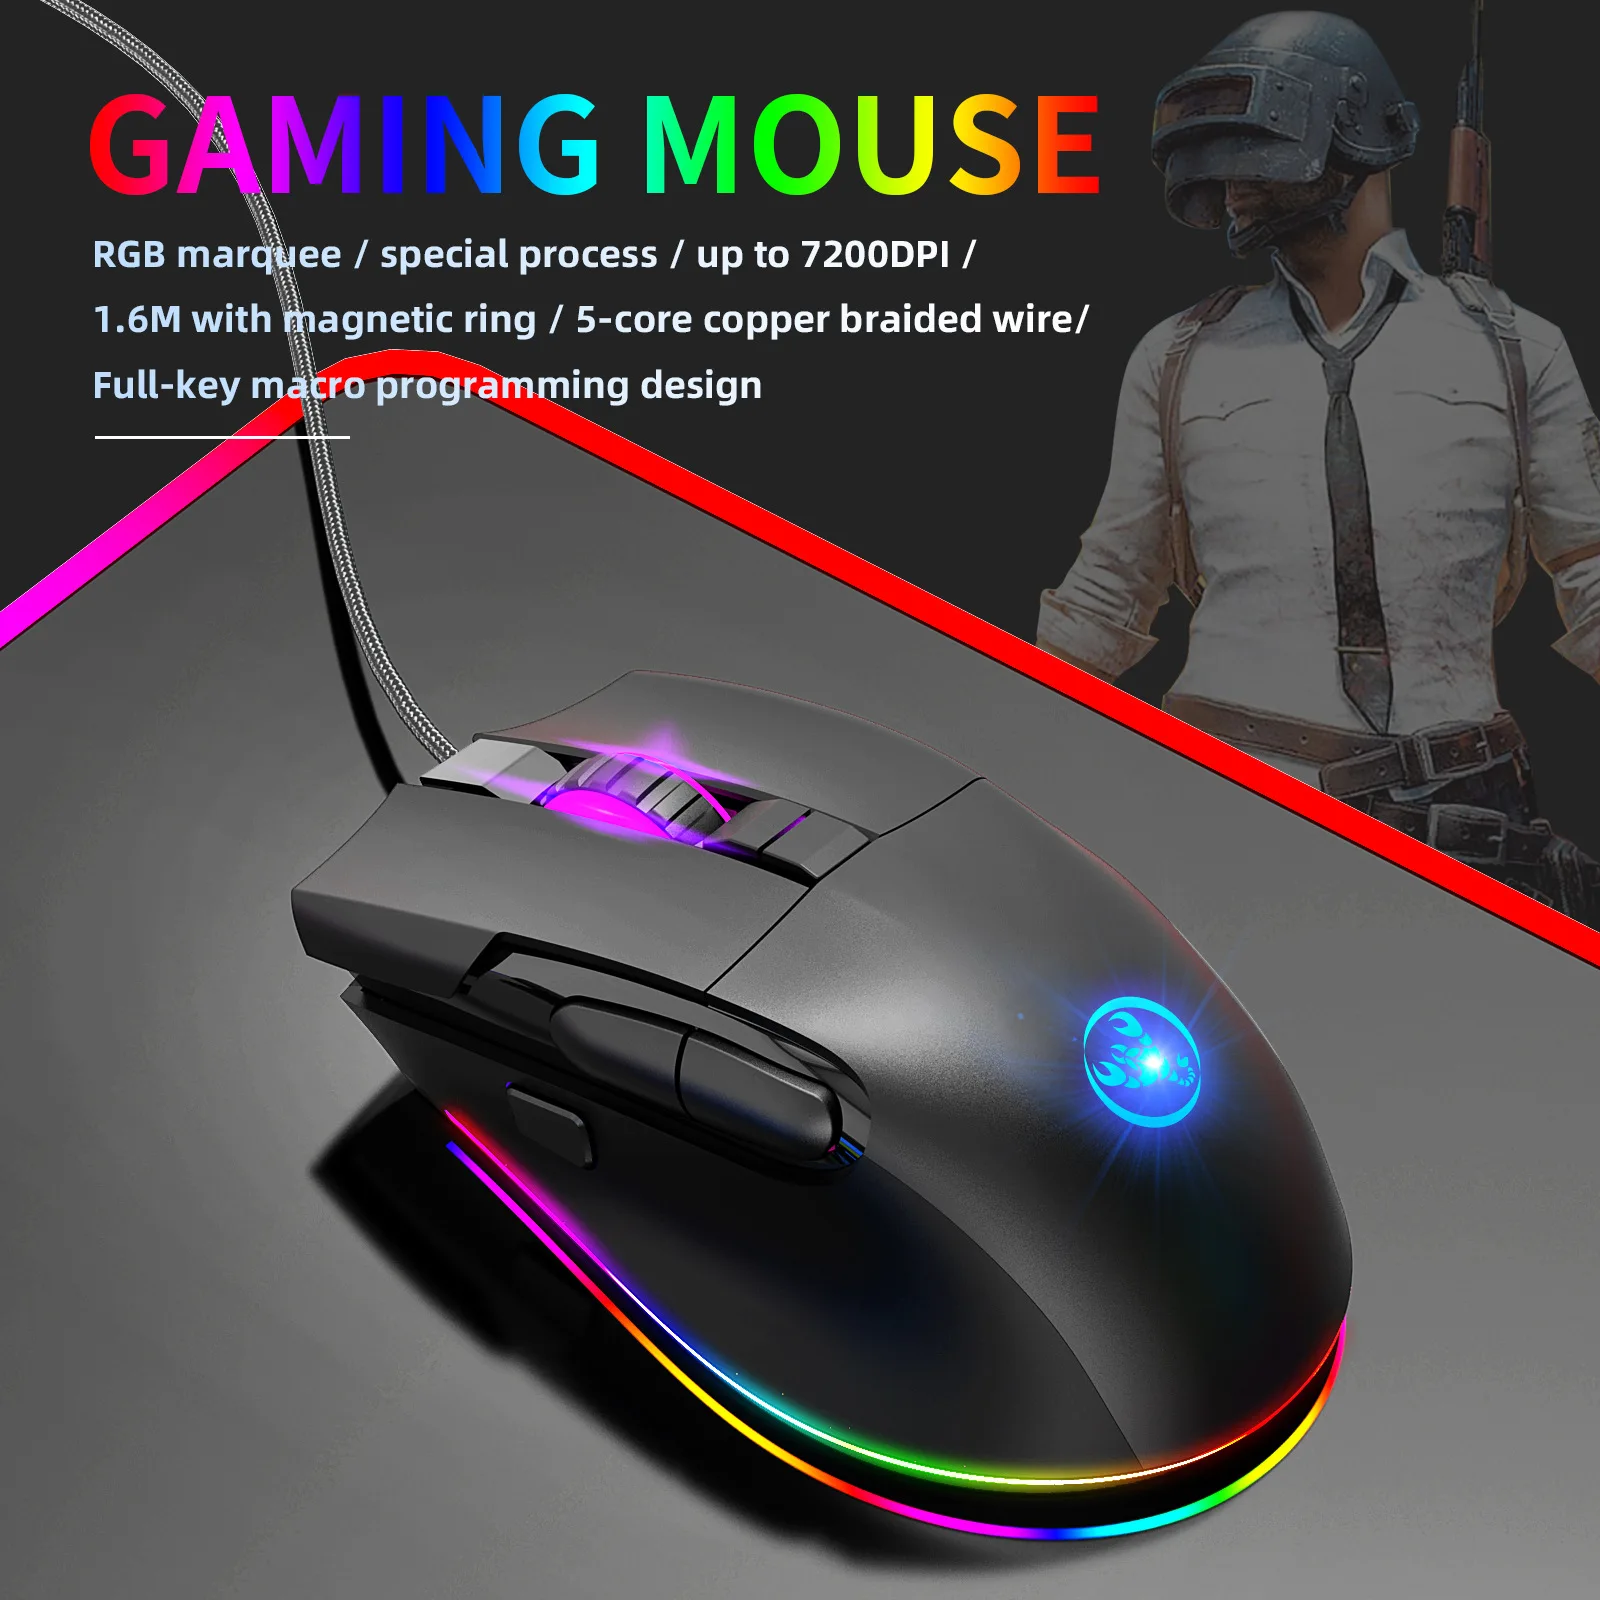 best pc gaming mouse Gaming Mouse Optical Sensor Left and RightHand Gaming Mouse USB Computer Mouse lighting effects DC 5V/100mA Mouse wired computer mouse